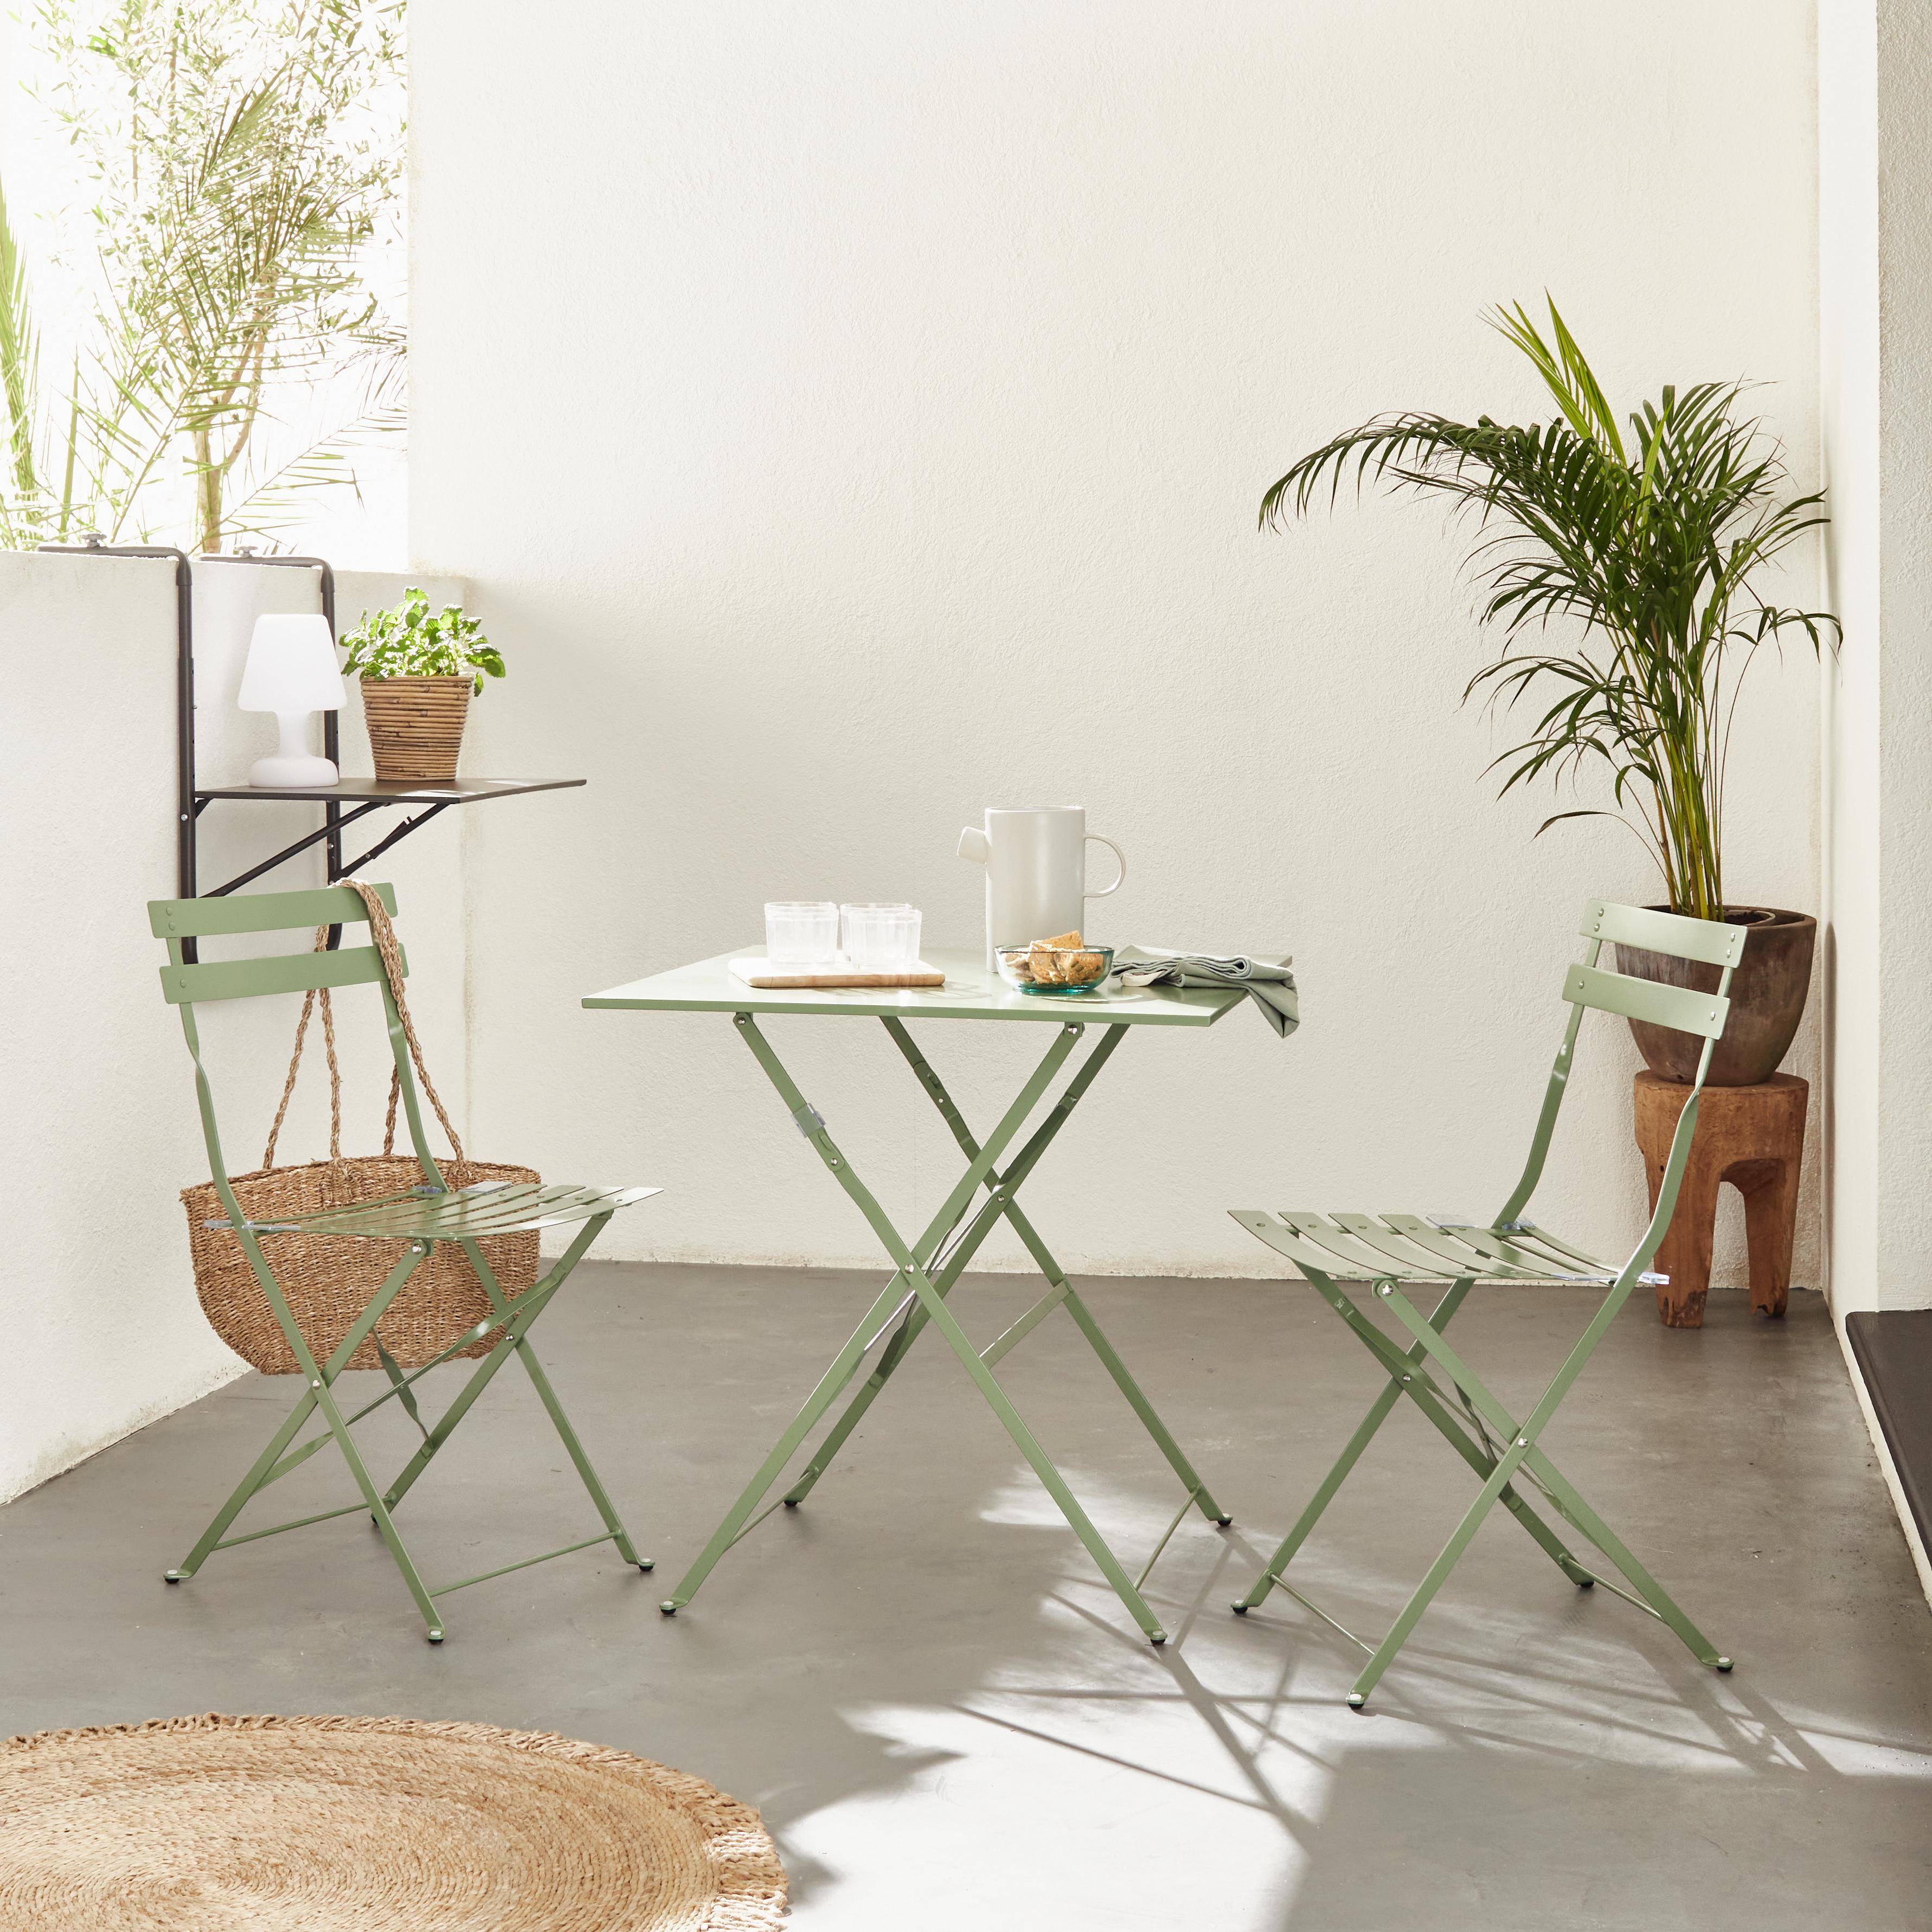 2-seater foldable thermo-lacquered steel bistro garden table with chairs, 70x70cm - Emilia - Sage geen,sweeek,Photo1